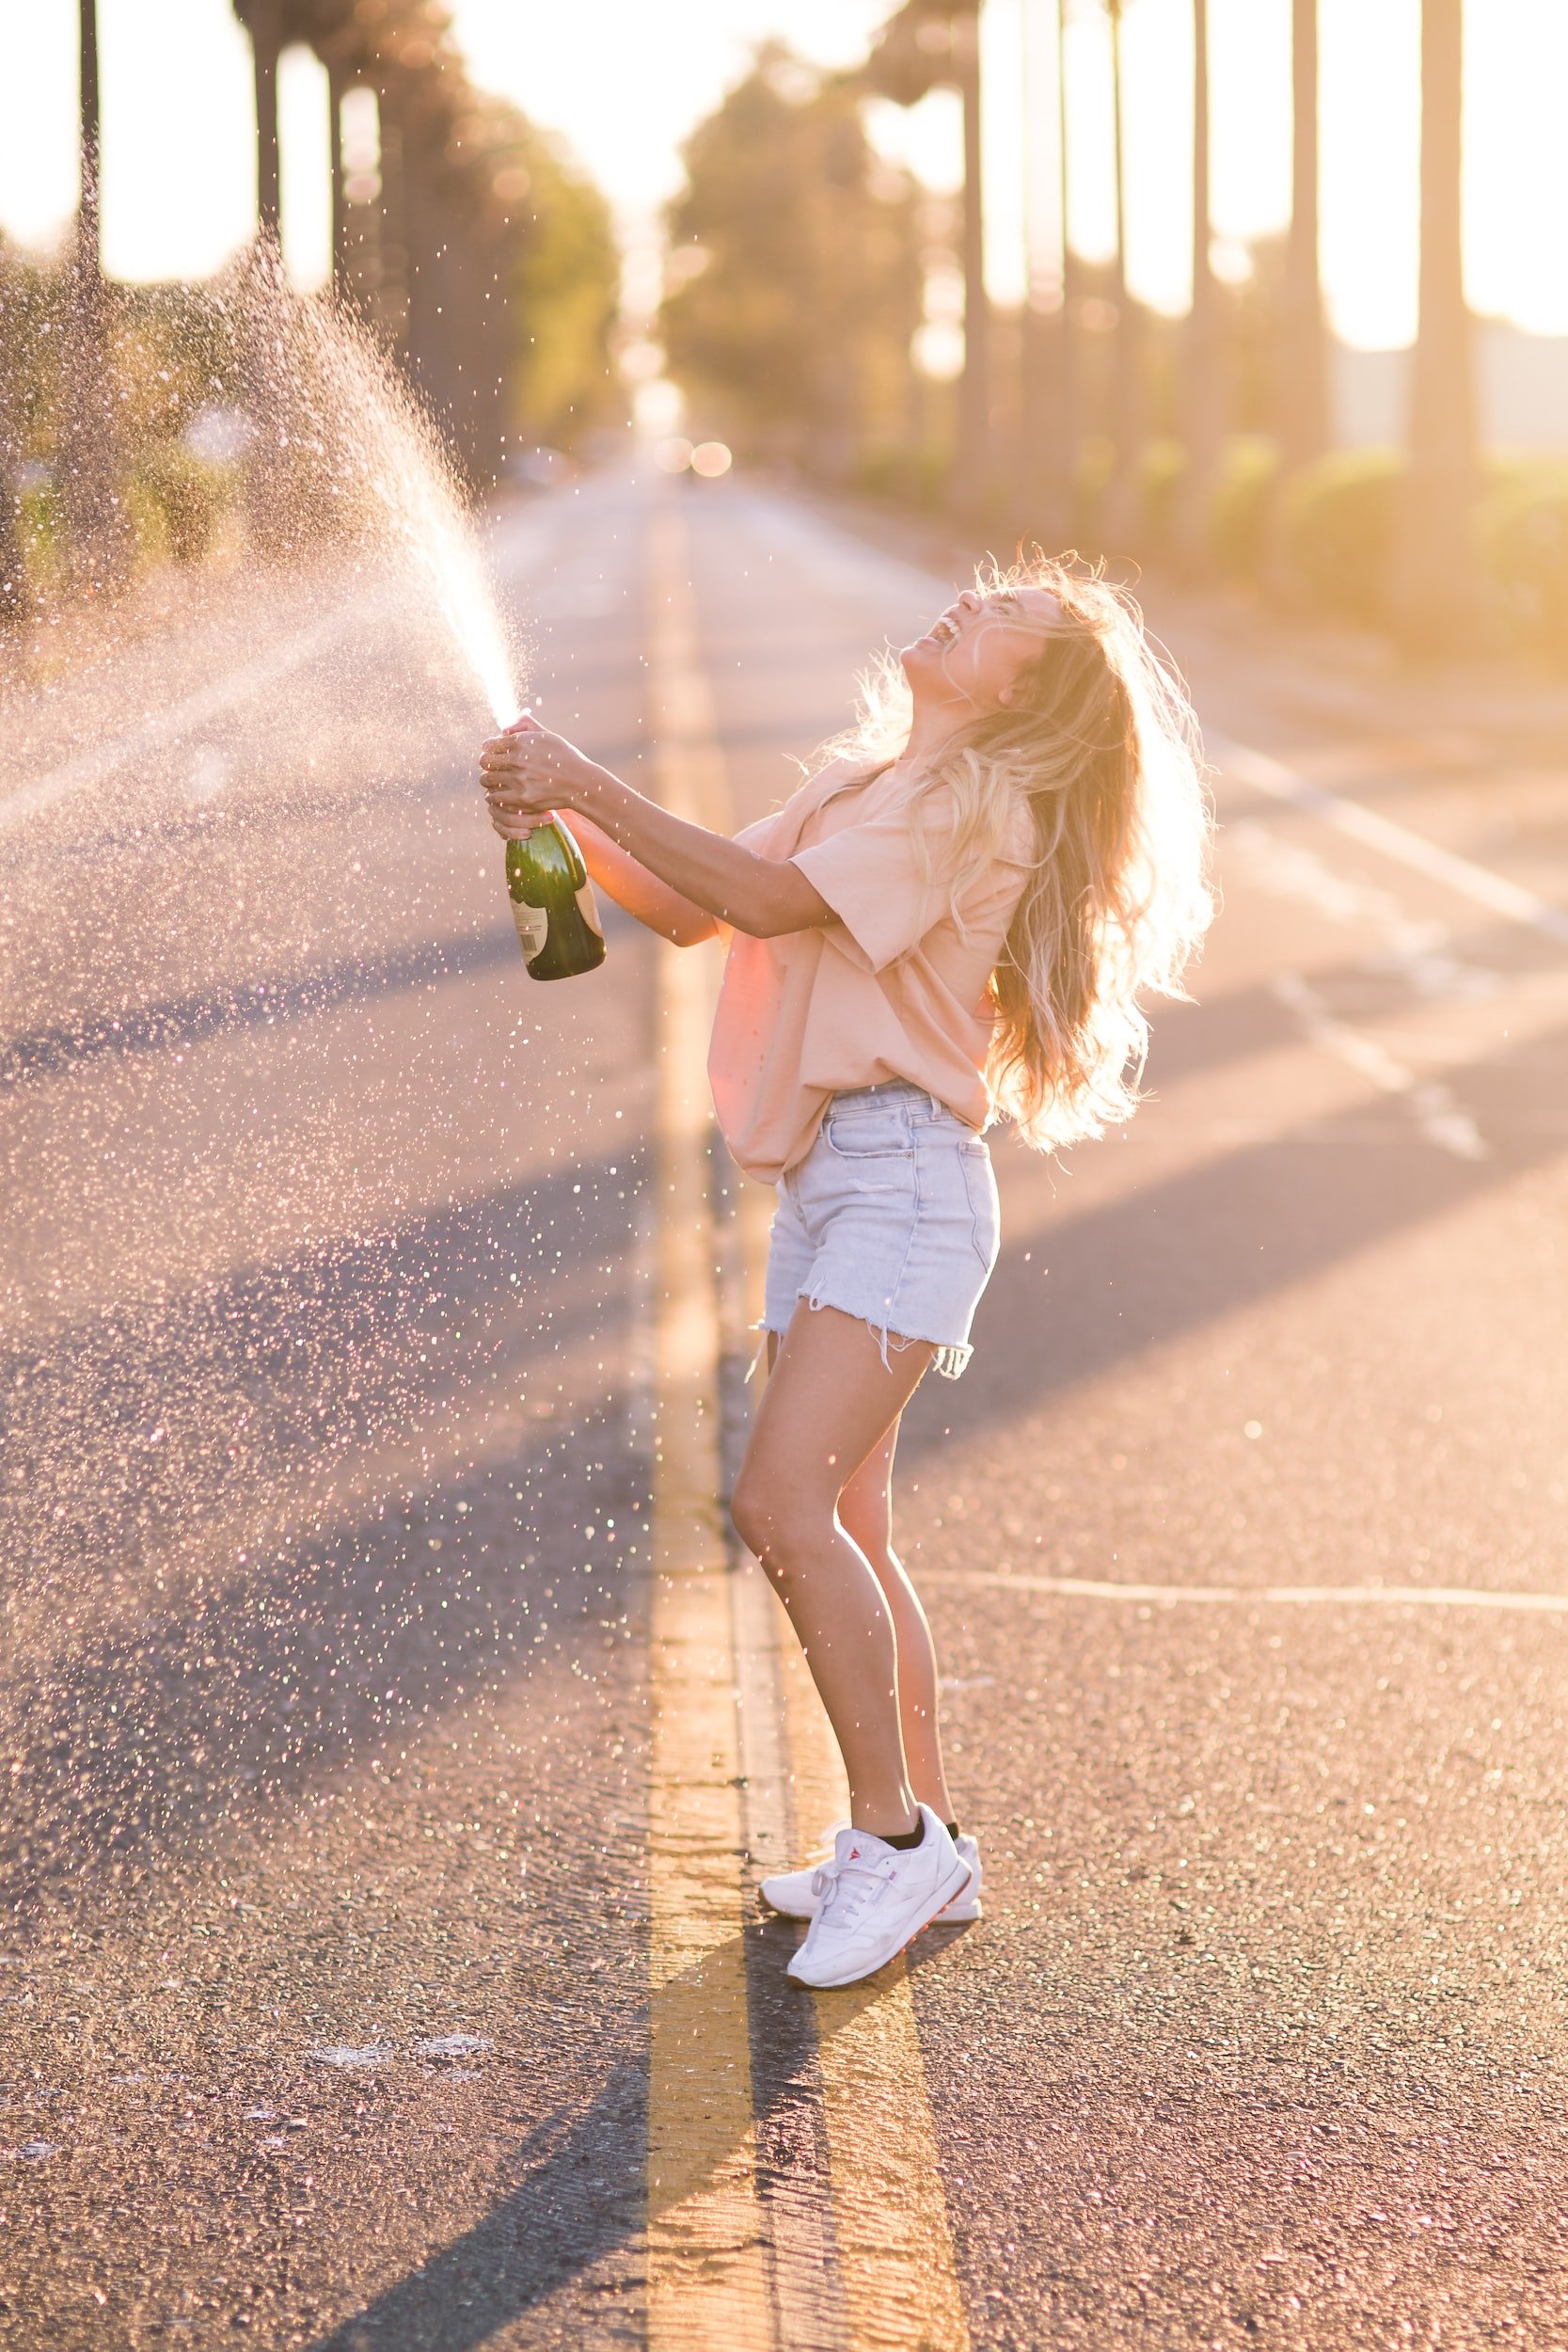 Girl standing in the middle of the road shaking a bottle of champagne